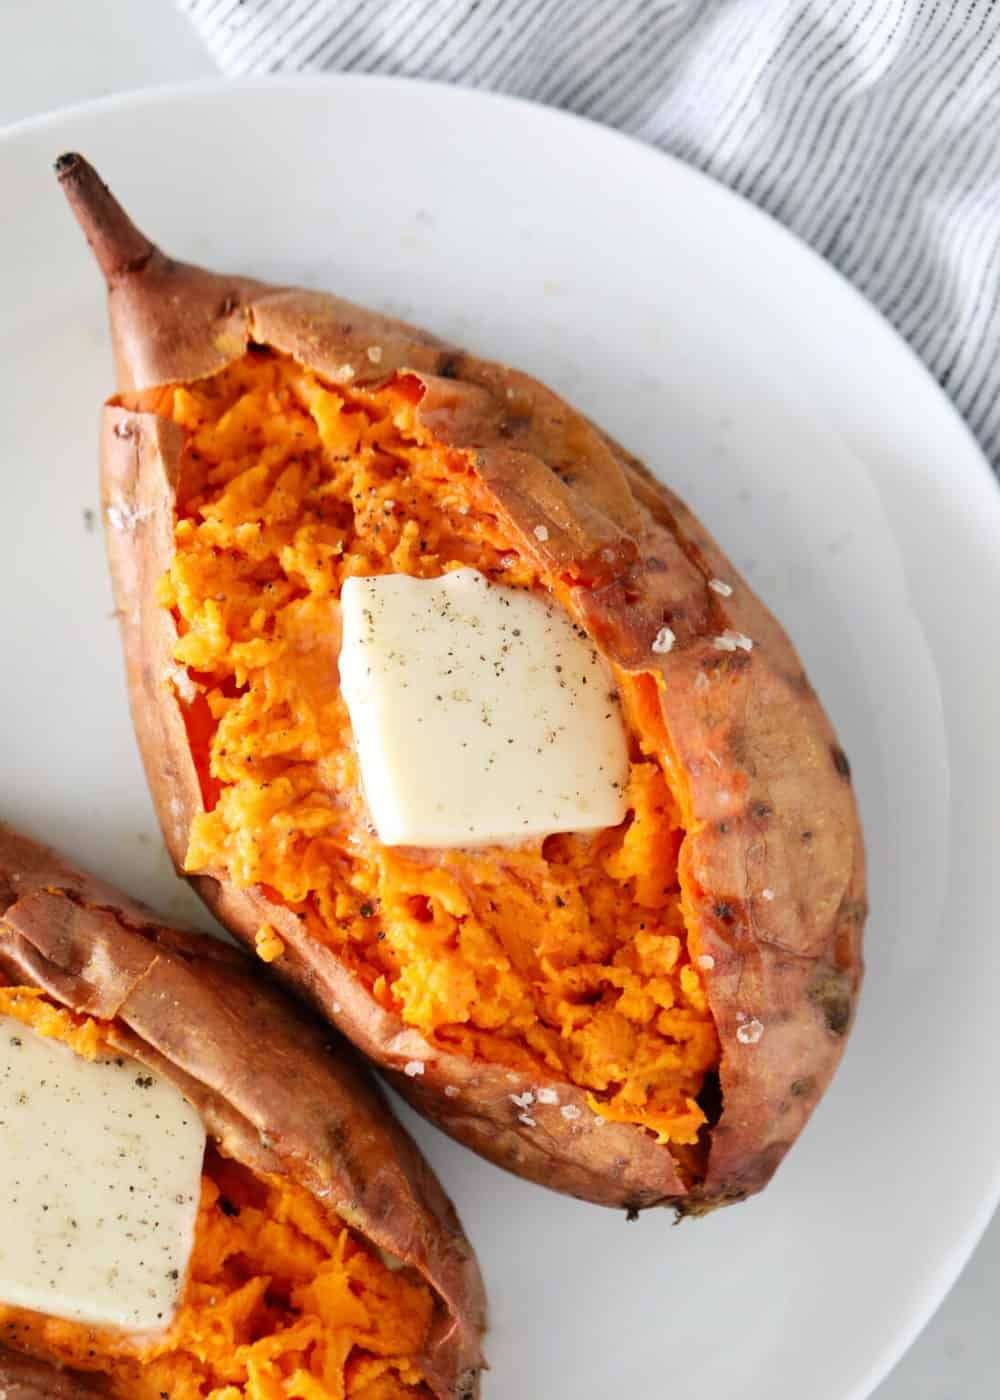 How Many Carbs In A Baked Sweet Potato : A baked potato, known in some ...